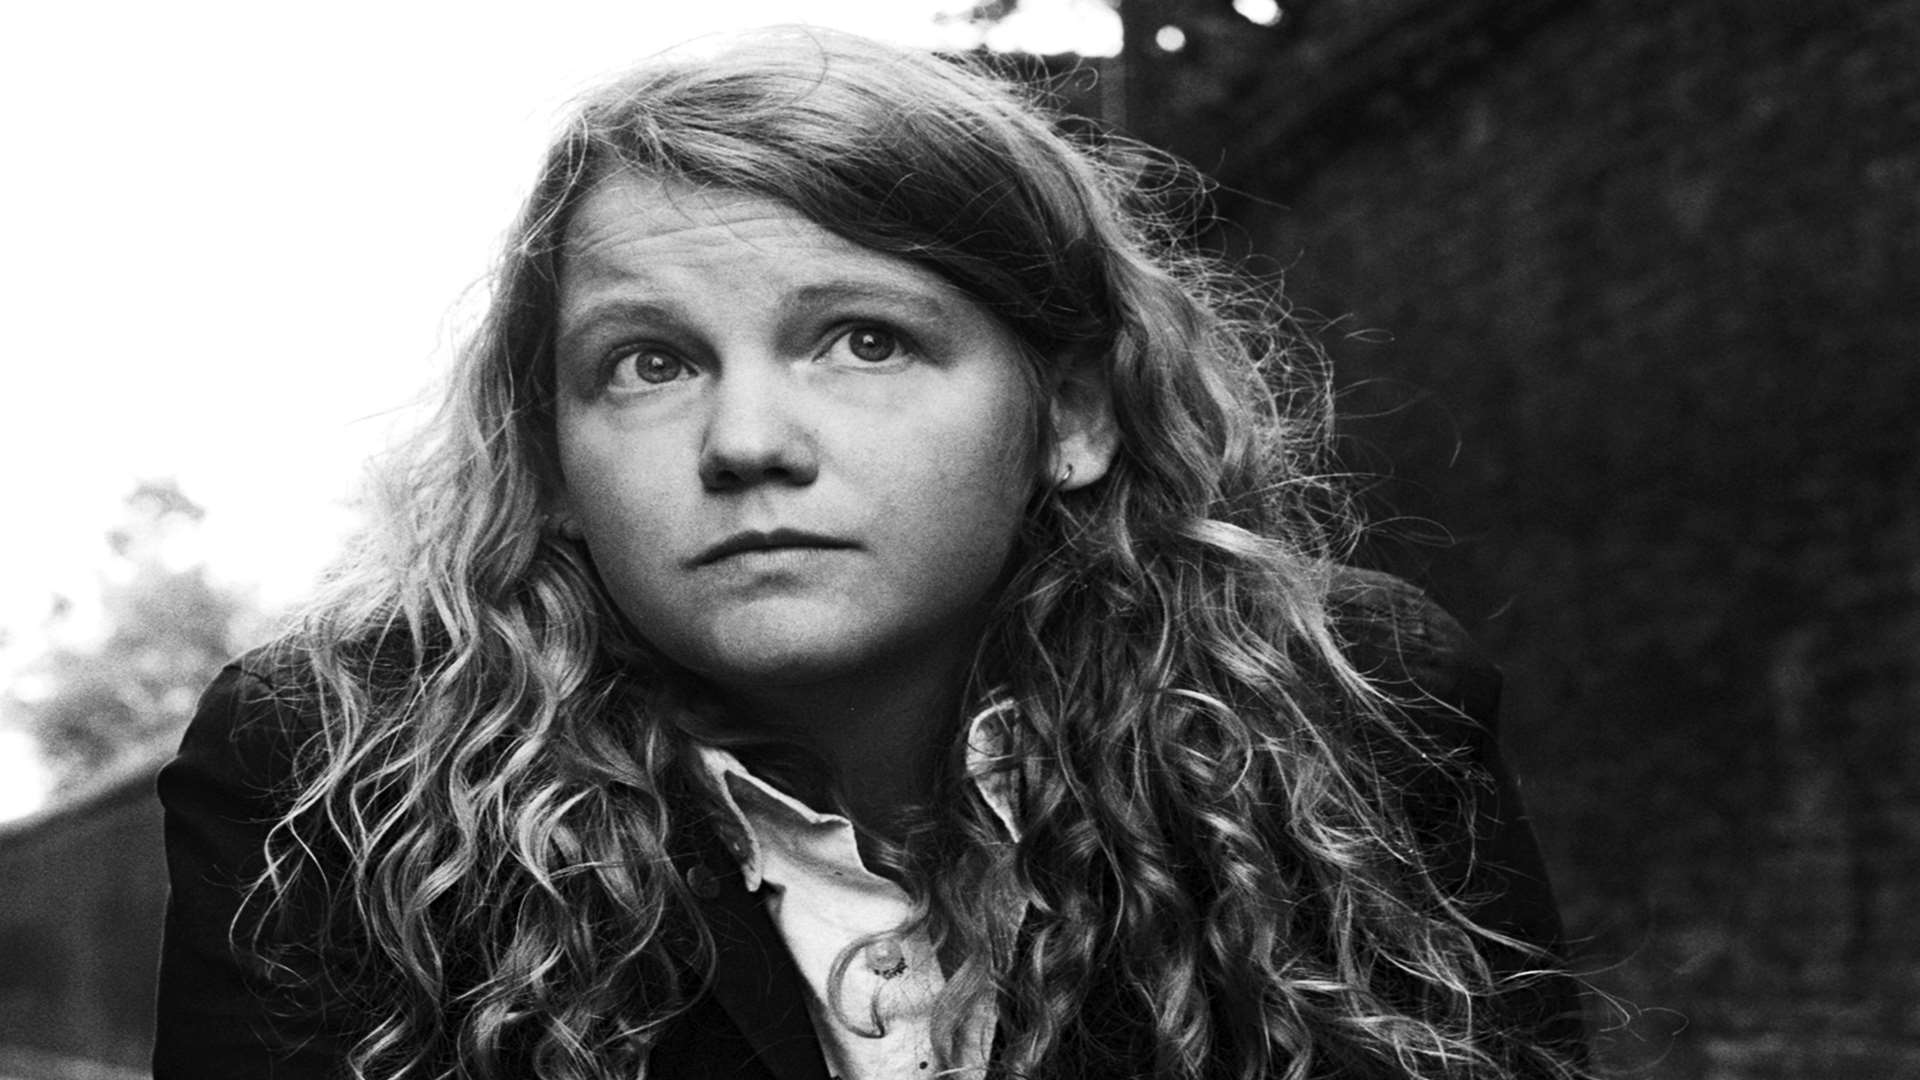 In 2013 Kate Tempest won the Ted Hughes Award - the first person under the age of 40 to win it